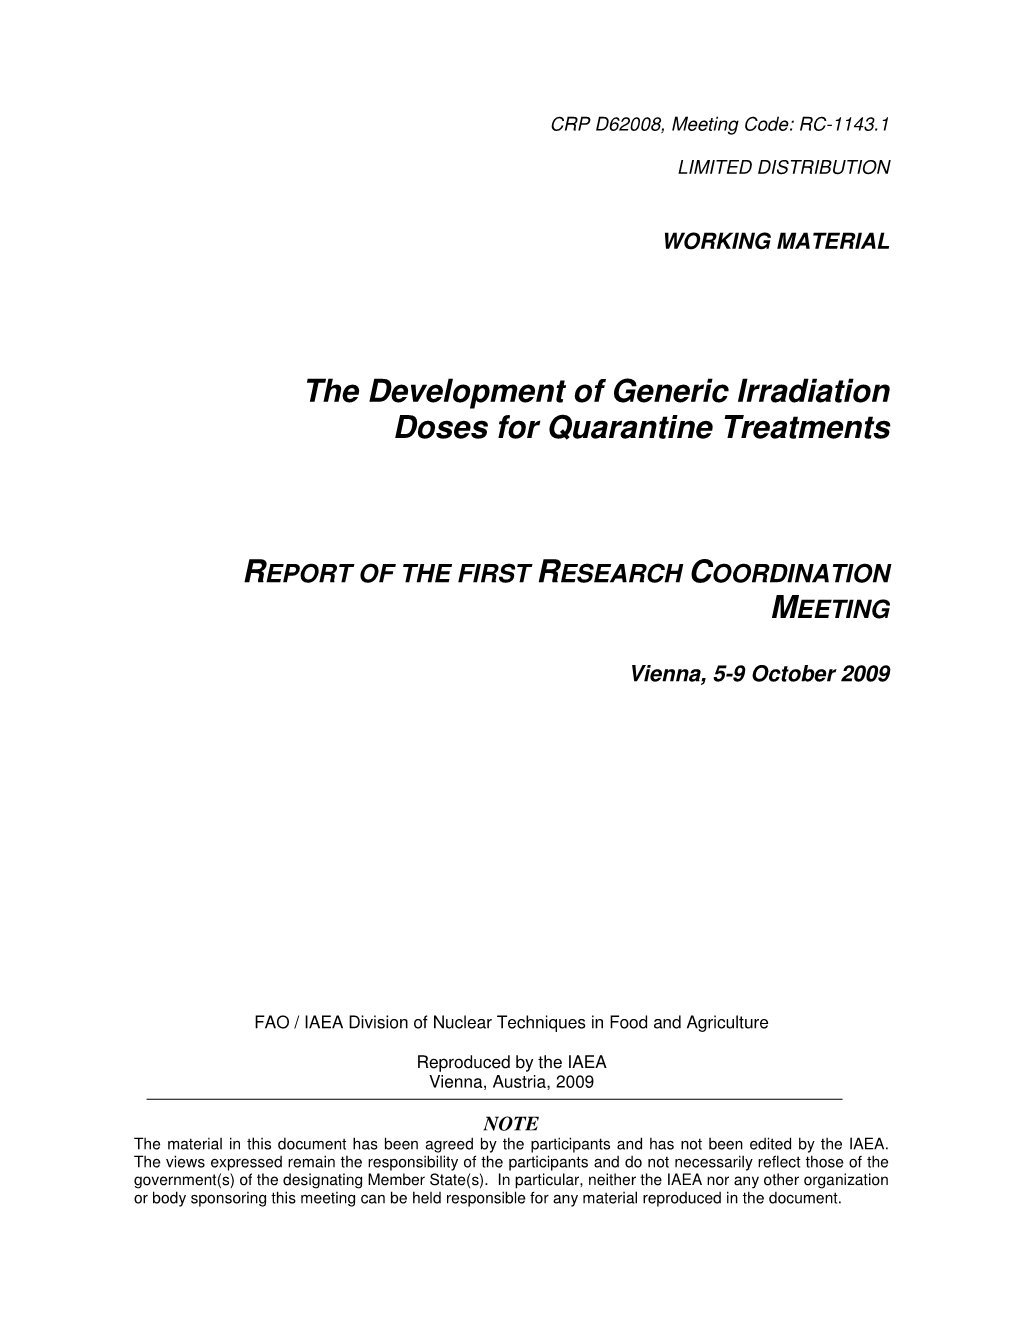 The Development of Generic Irradiation Doses for Quarantine Treatments